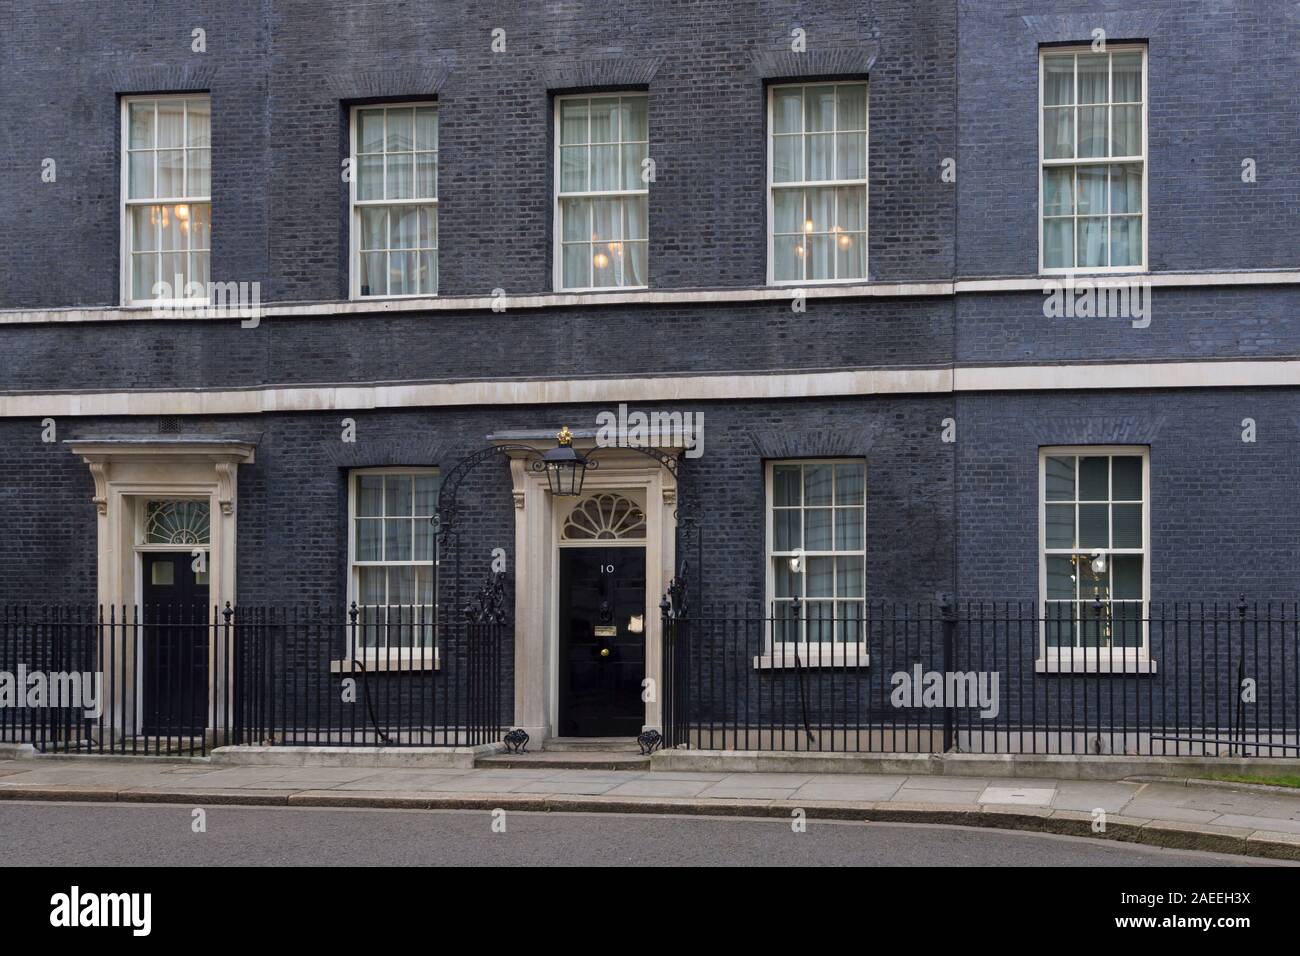 10 Downing Street the official residence and the office of the British Prime  Minister, London, UK 7 Feb 2018 Stock Photo - Alamy